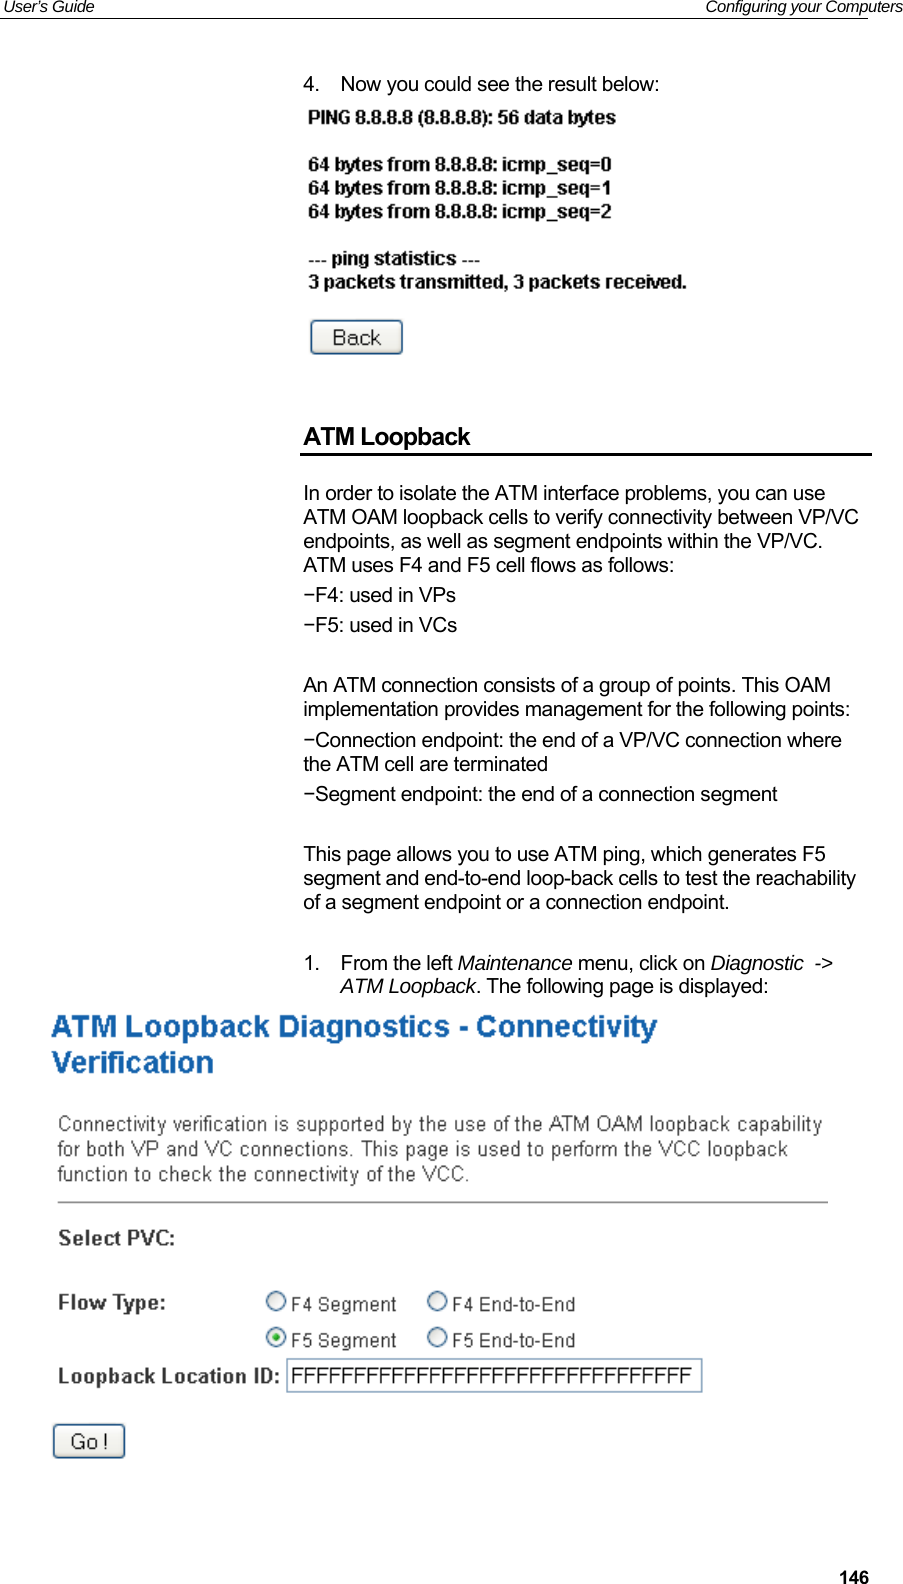 User’s Guide   Configuring your Computers  1464.  Now you could see the result below:    ATM Loopback In order to isolate the ATM interface problems, you can use ATM OAM loopback cells to verify connectivity between VP/VC endpoints, as well as segment endpoints within the VP/VC. ATM uses F4 and F5 cell flows as follows: −F4: used in VPs −F5: used in VCs  An ATM connection consists of a group of points. This OAM implementation provides management for the following points: −Connection endpoint: the end of a VP/VC connection where the ATM cell are terminated −Segment endpoint: the end of a connection segment  This page allows you to use ATM ping, which generates F5 segment and end-to-end loop-back cells to test the reachability of a segment endpoint or a connection endpoint.  1.  From the left Maintenance menu, click on Diagnostic  -&gt; ATM Loopback. The following page is displayed:   